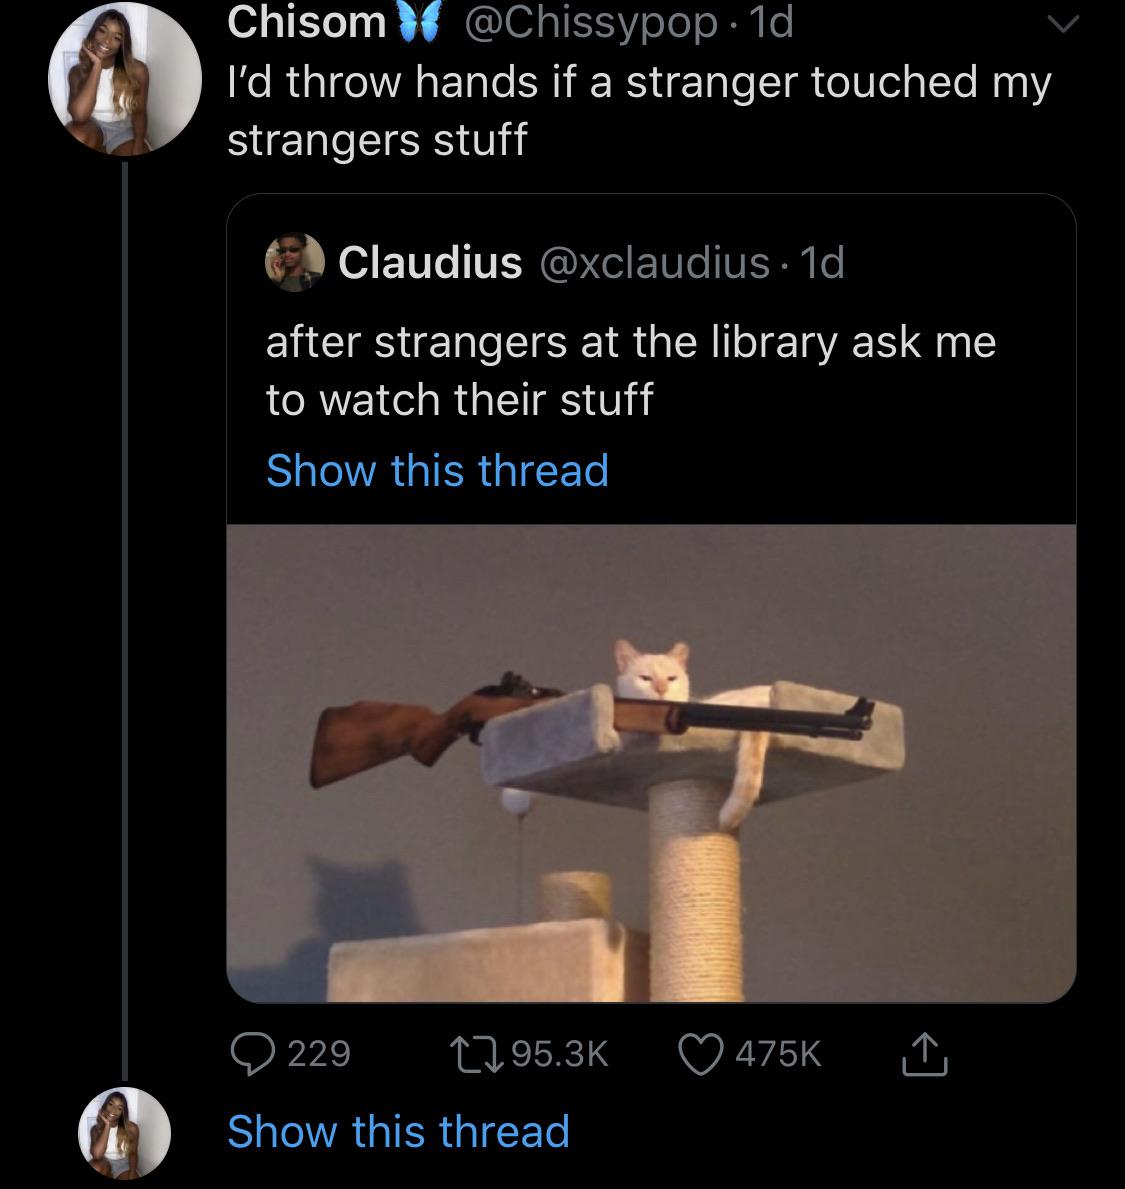 Tweets, Alice, Person, WHAT DO Black Twitter Memes Tweets, Alice, Person, WHAT DO text: Chisom @Chissypop • Id I'd throw hands if a stranger touched my strangers stuff Claudius @xclaudius • Id after strangers at the library ask me to watch their stuff Show this thread 0 229 CO 95.3K 0 475K Show this thread 